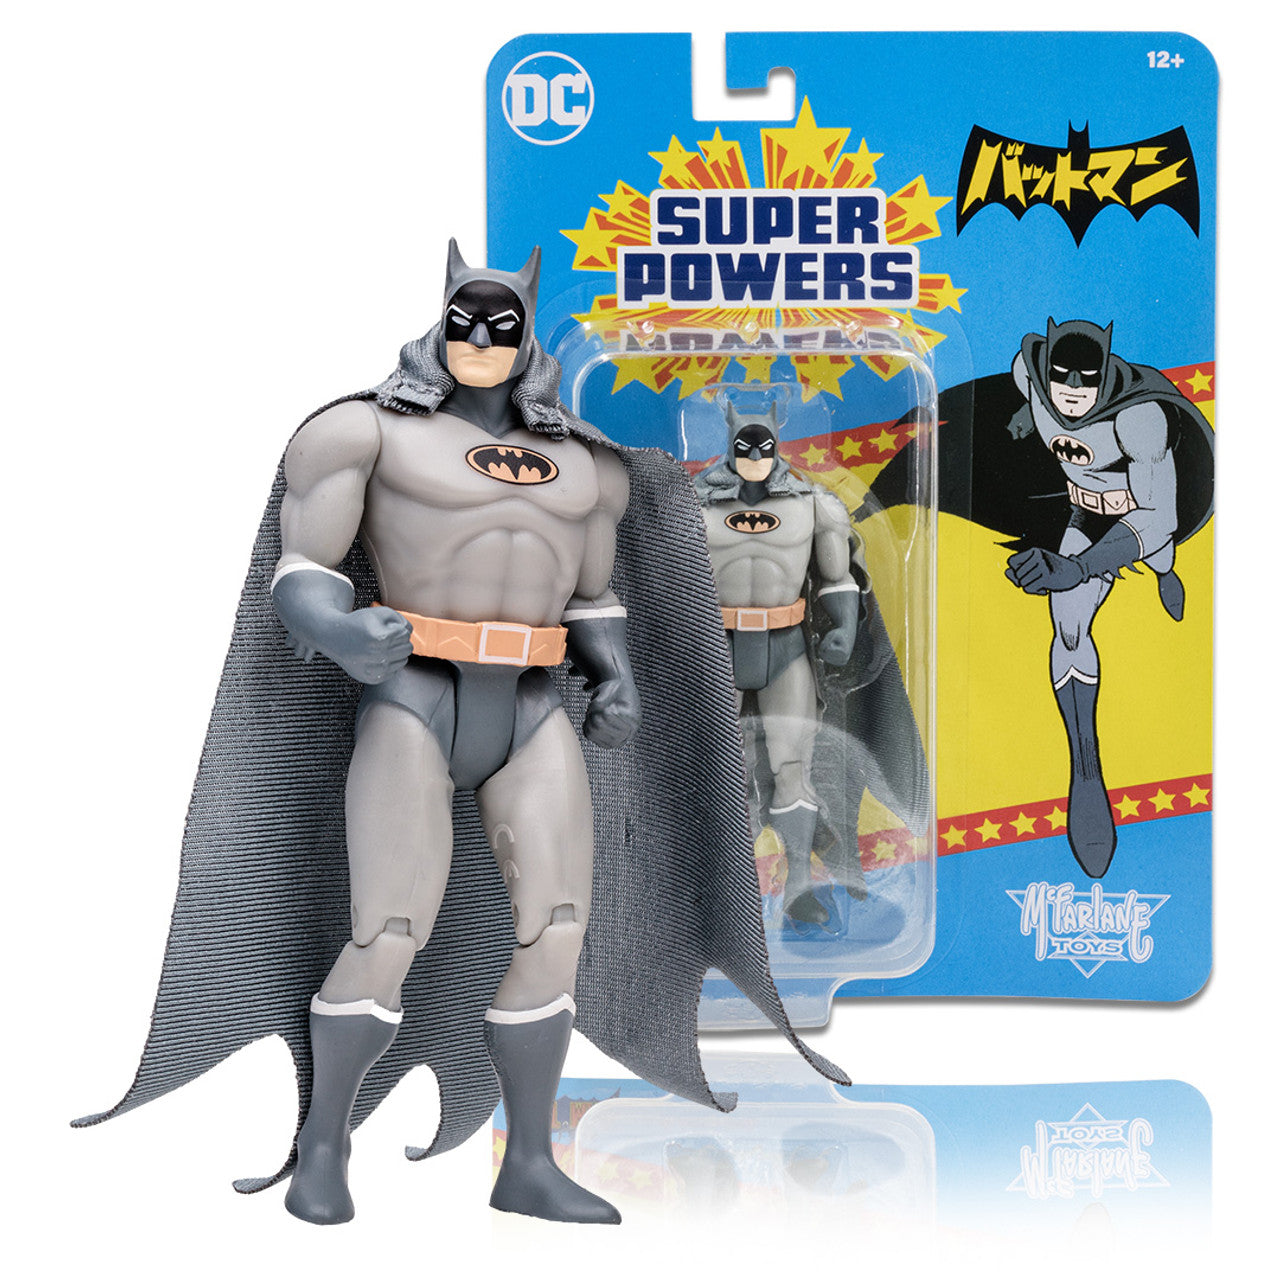 [PRE-ORDER] DC Super Powers - Action Figures and Vehicles - Bundle Set of 6 Items